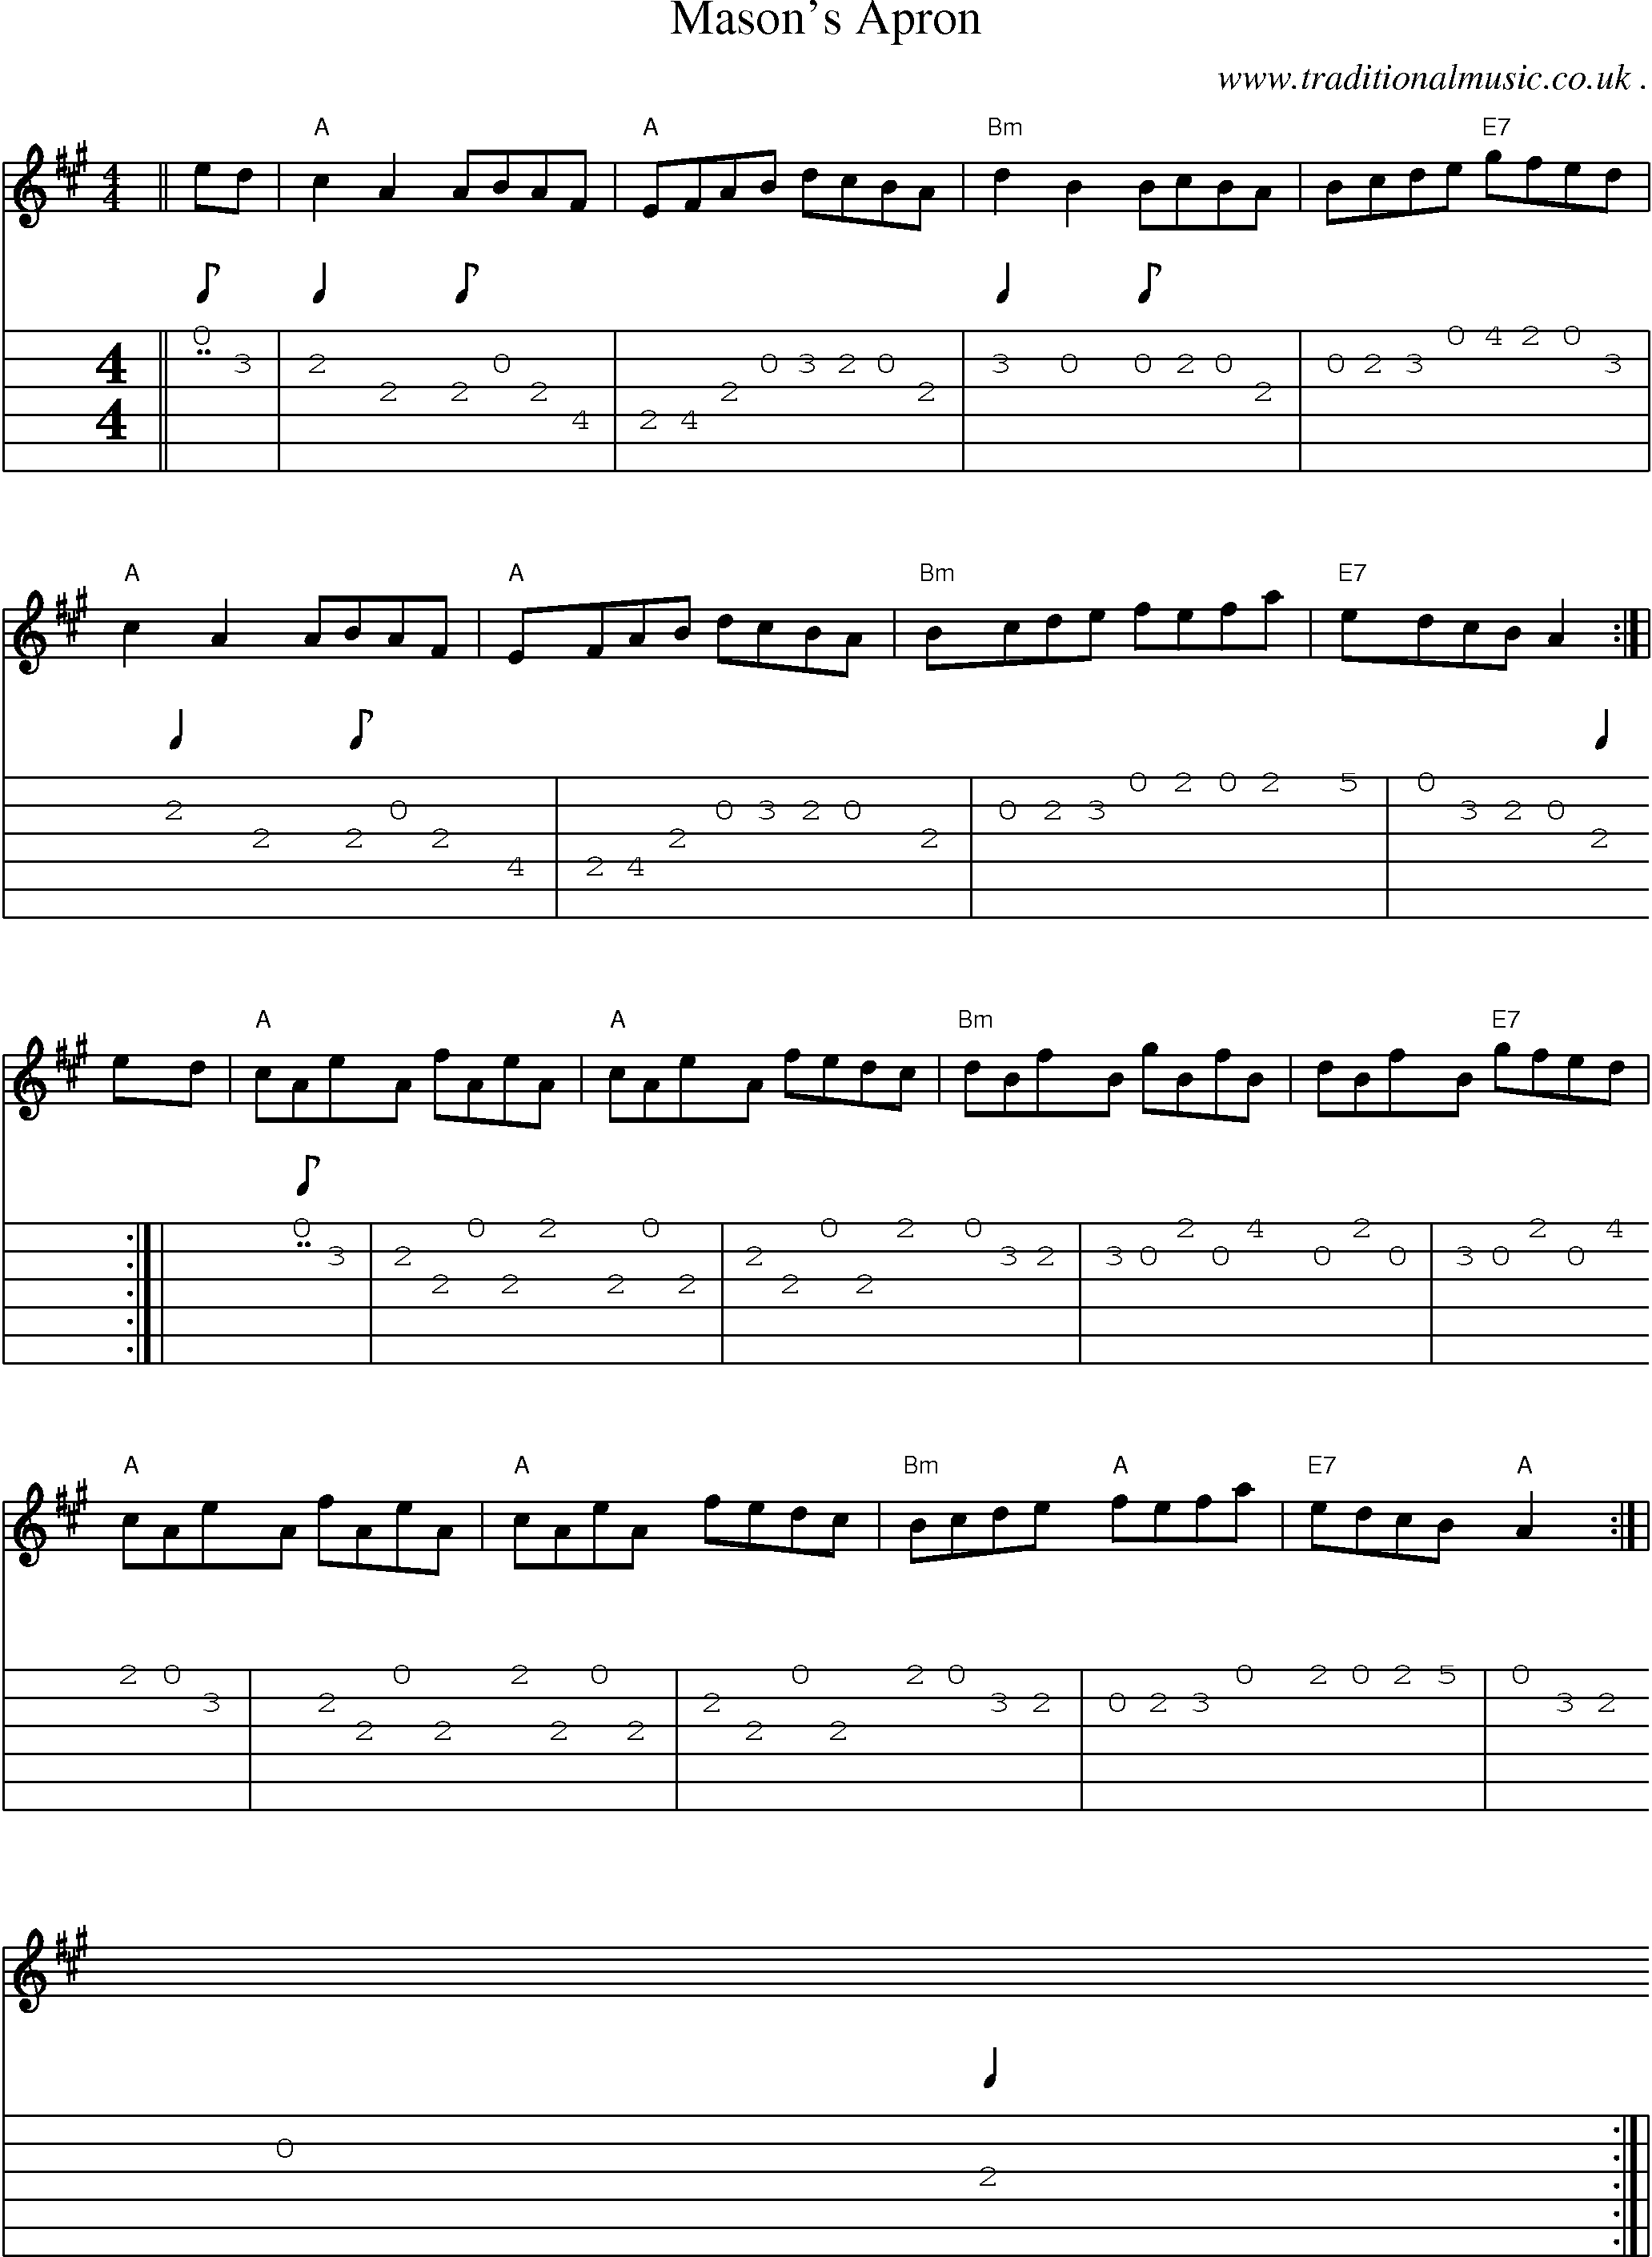 Sheet-music  score, Chords and Guitar Tabs for Masons Apron1